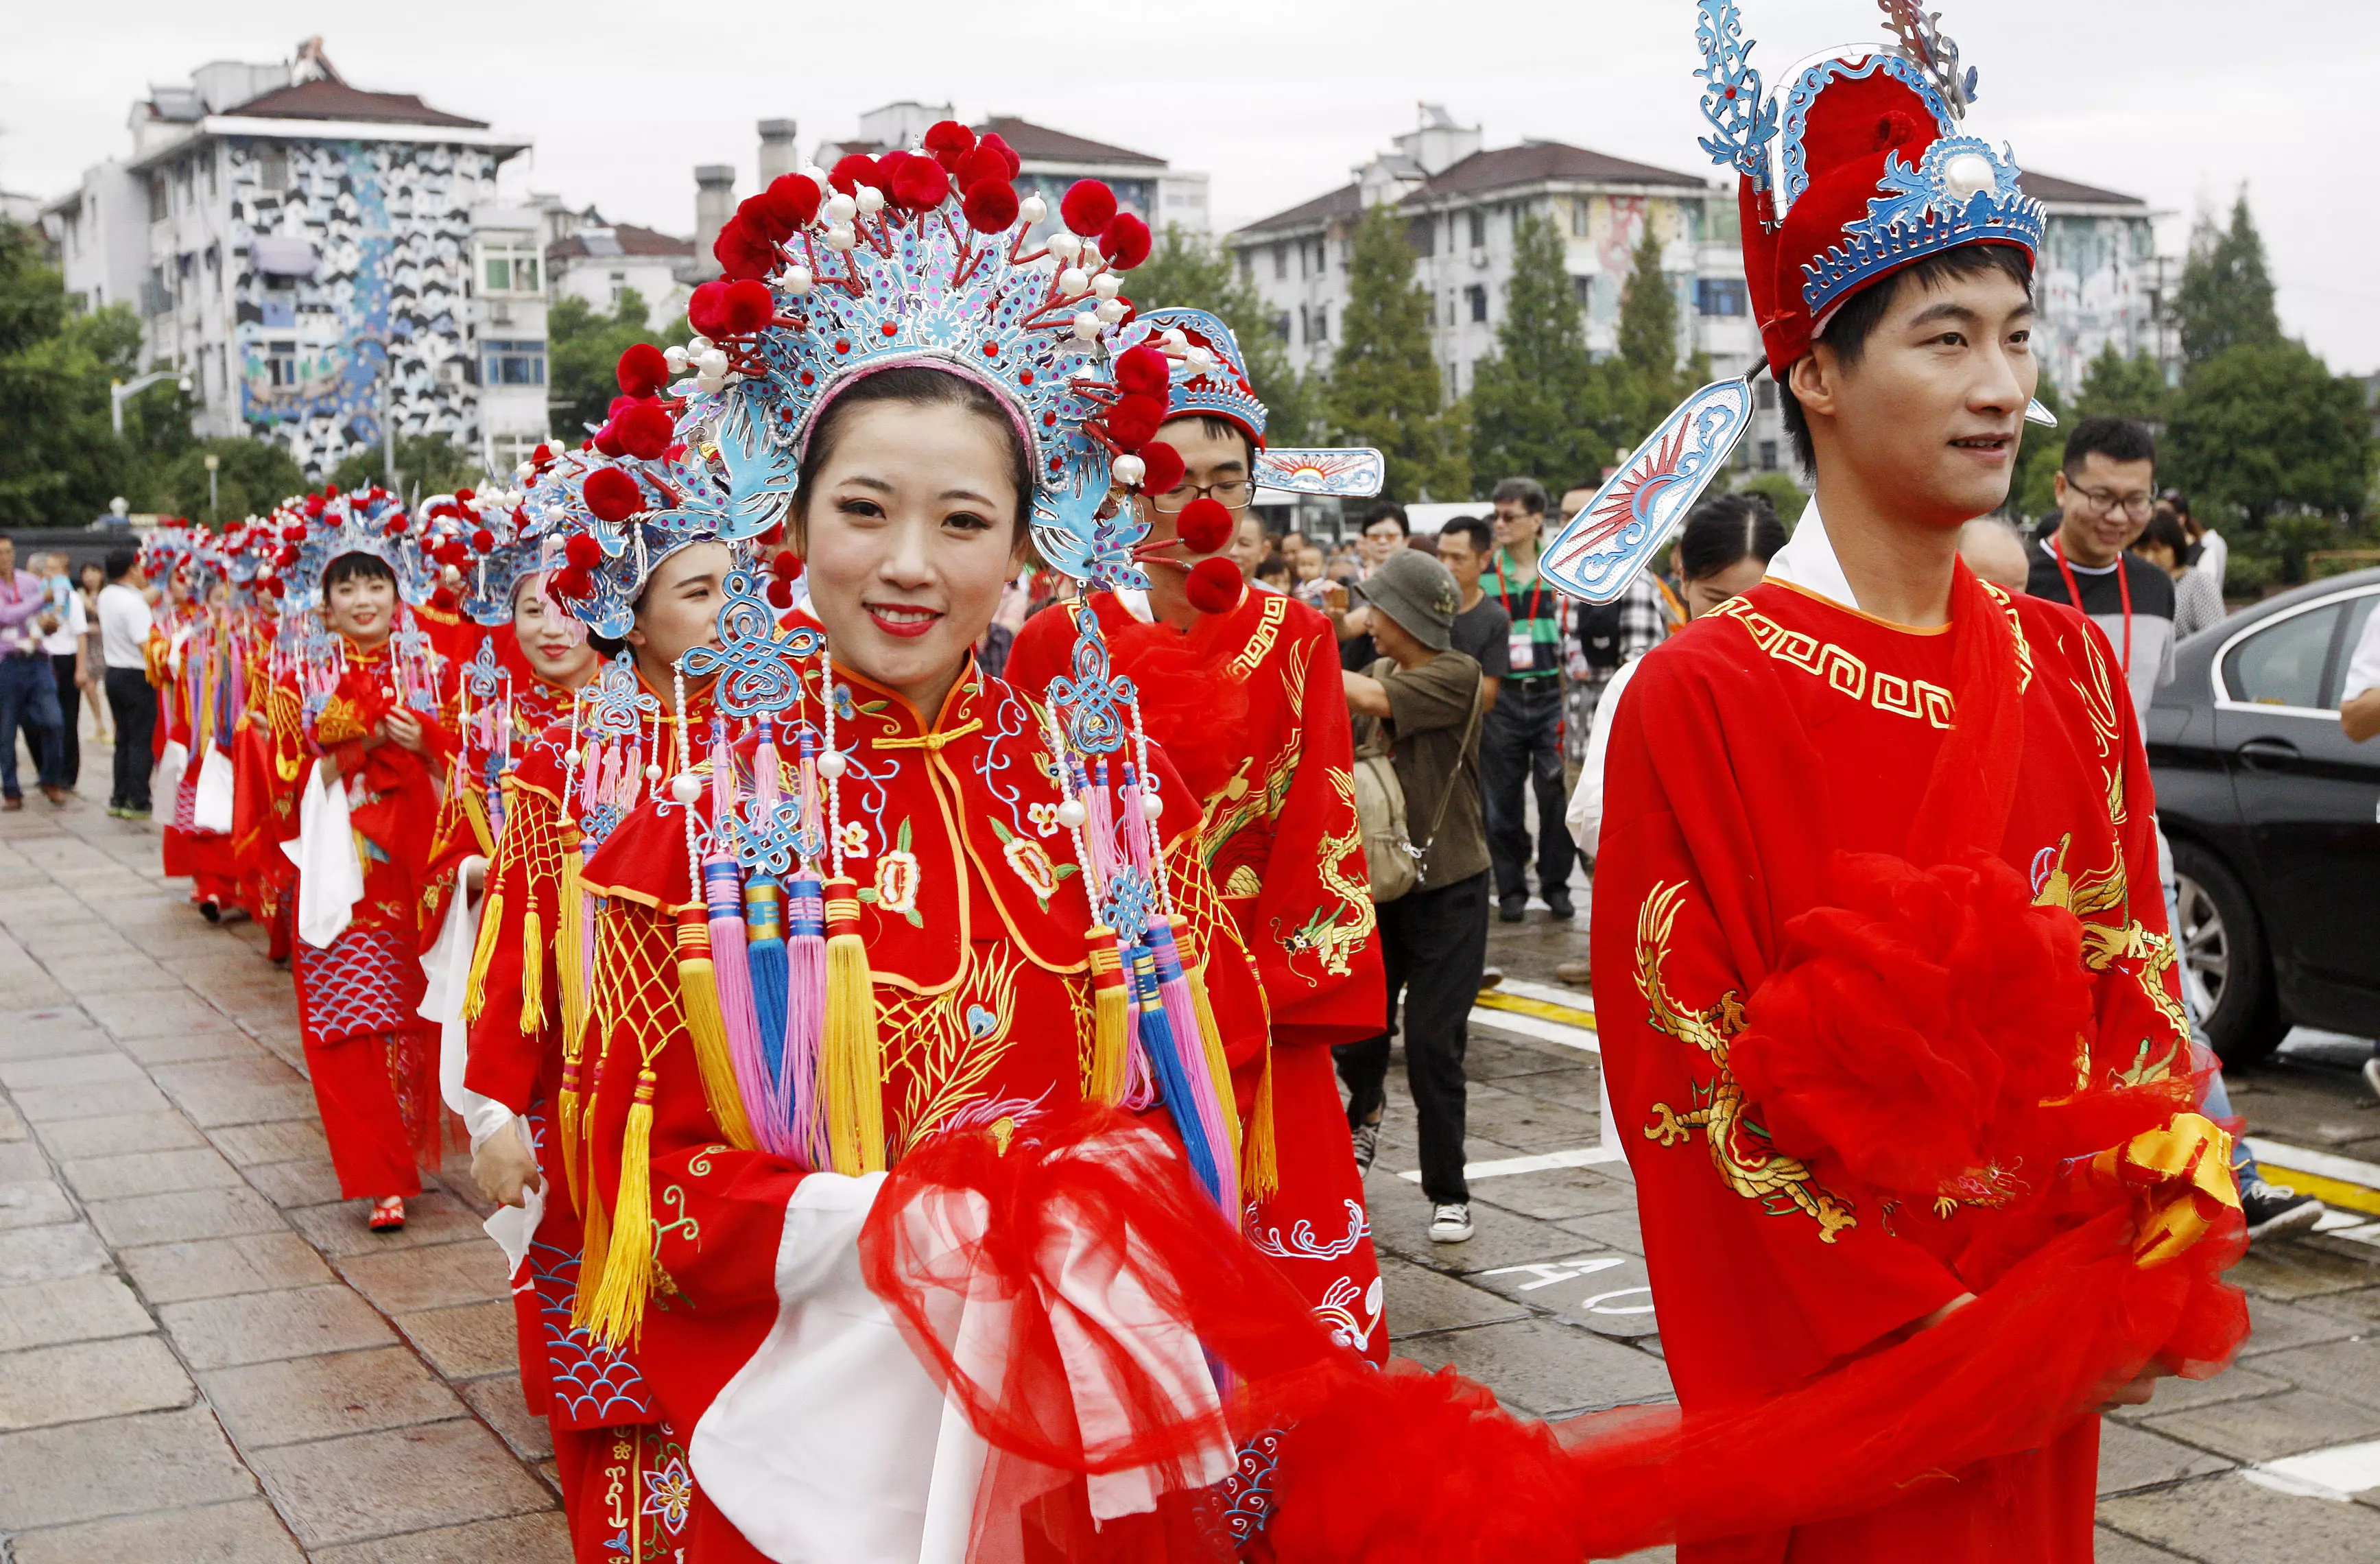 This is what a traditional Chinese wedding looks like in Shanghai.